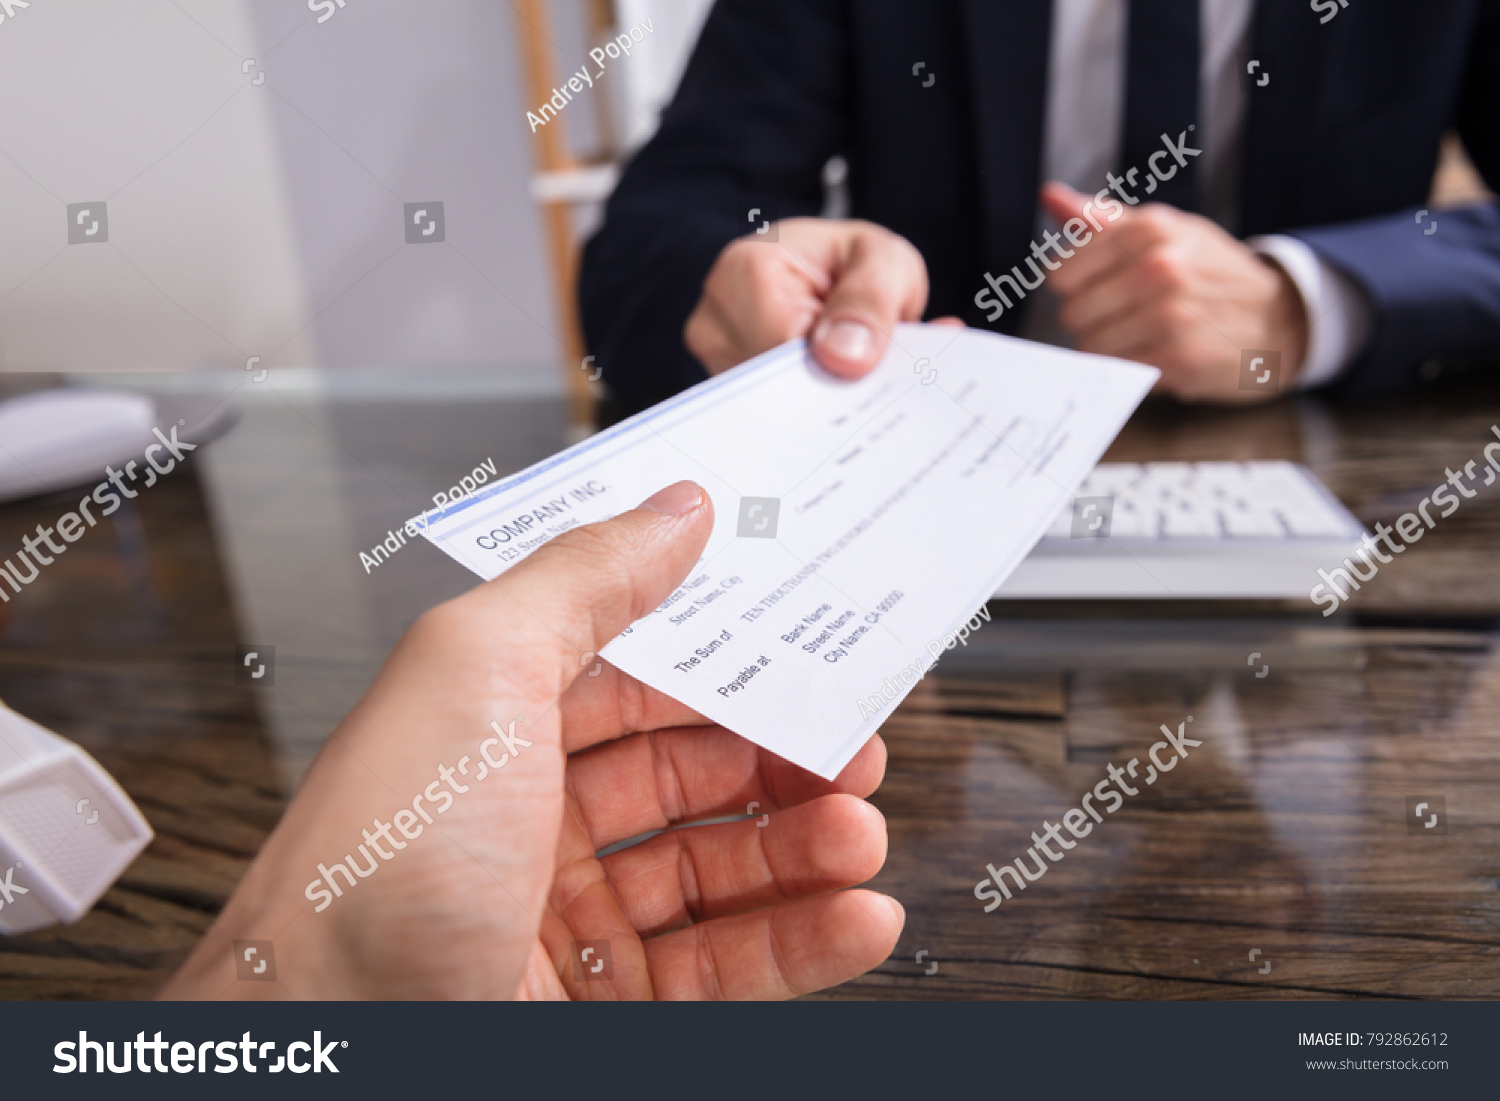 Close-up Of A Businessperson's Hand Giving Cheque To Colleague At Workplace #792862612